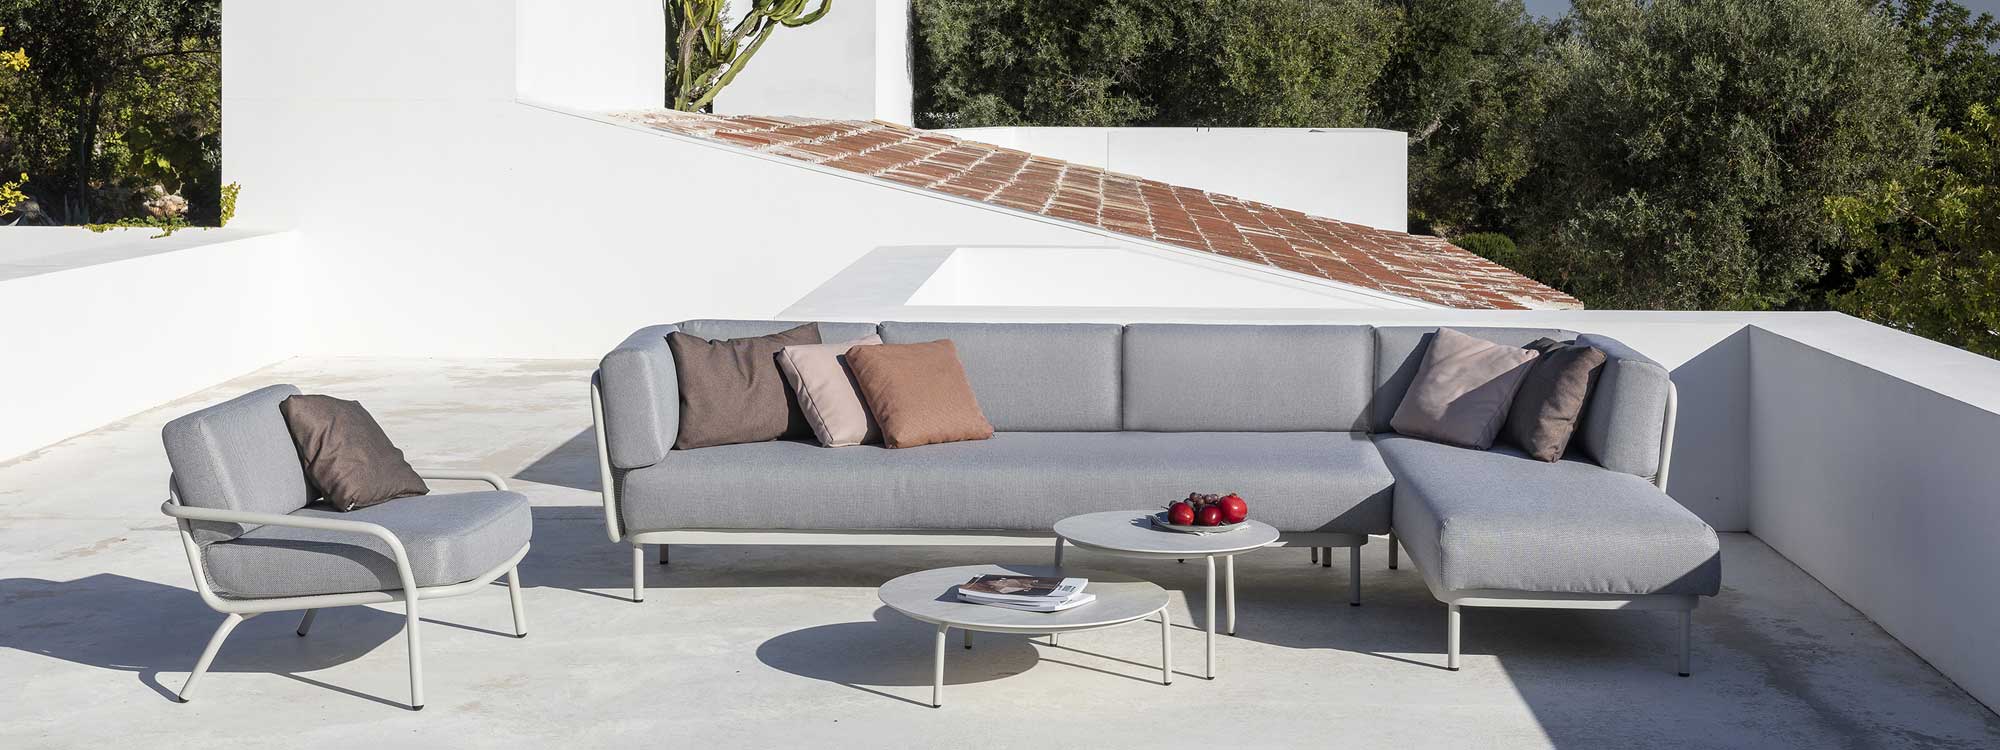 White Baza garden sofa and Starling longer chair & low tables on sizzling hot terrace